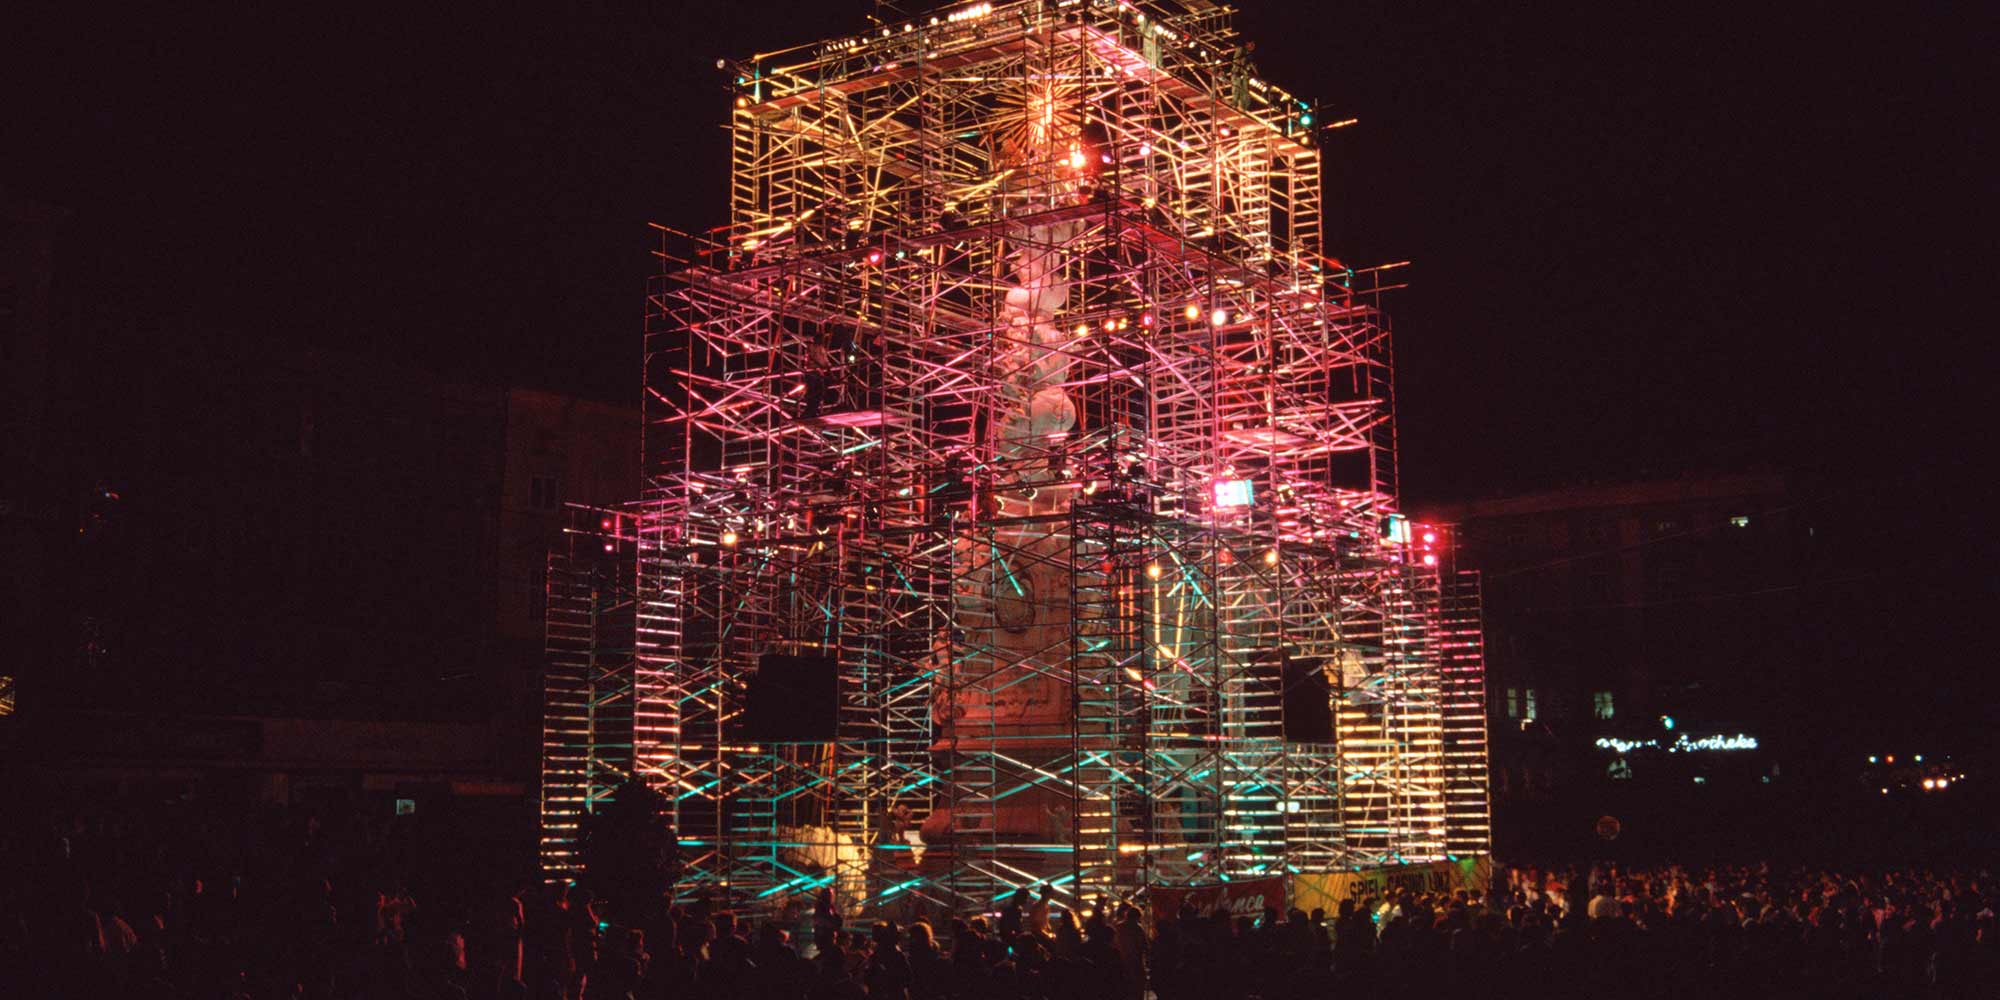 <strong>1986:</strong> The "Aurora Elettronica" transforms the main square in Linz into a scenario of light, projections and electronic sound vortices.